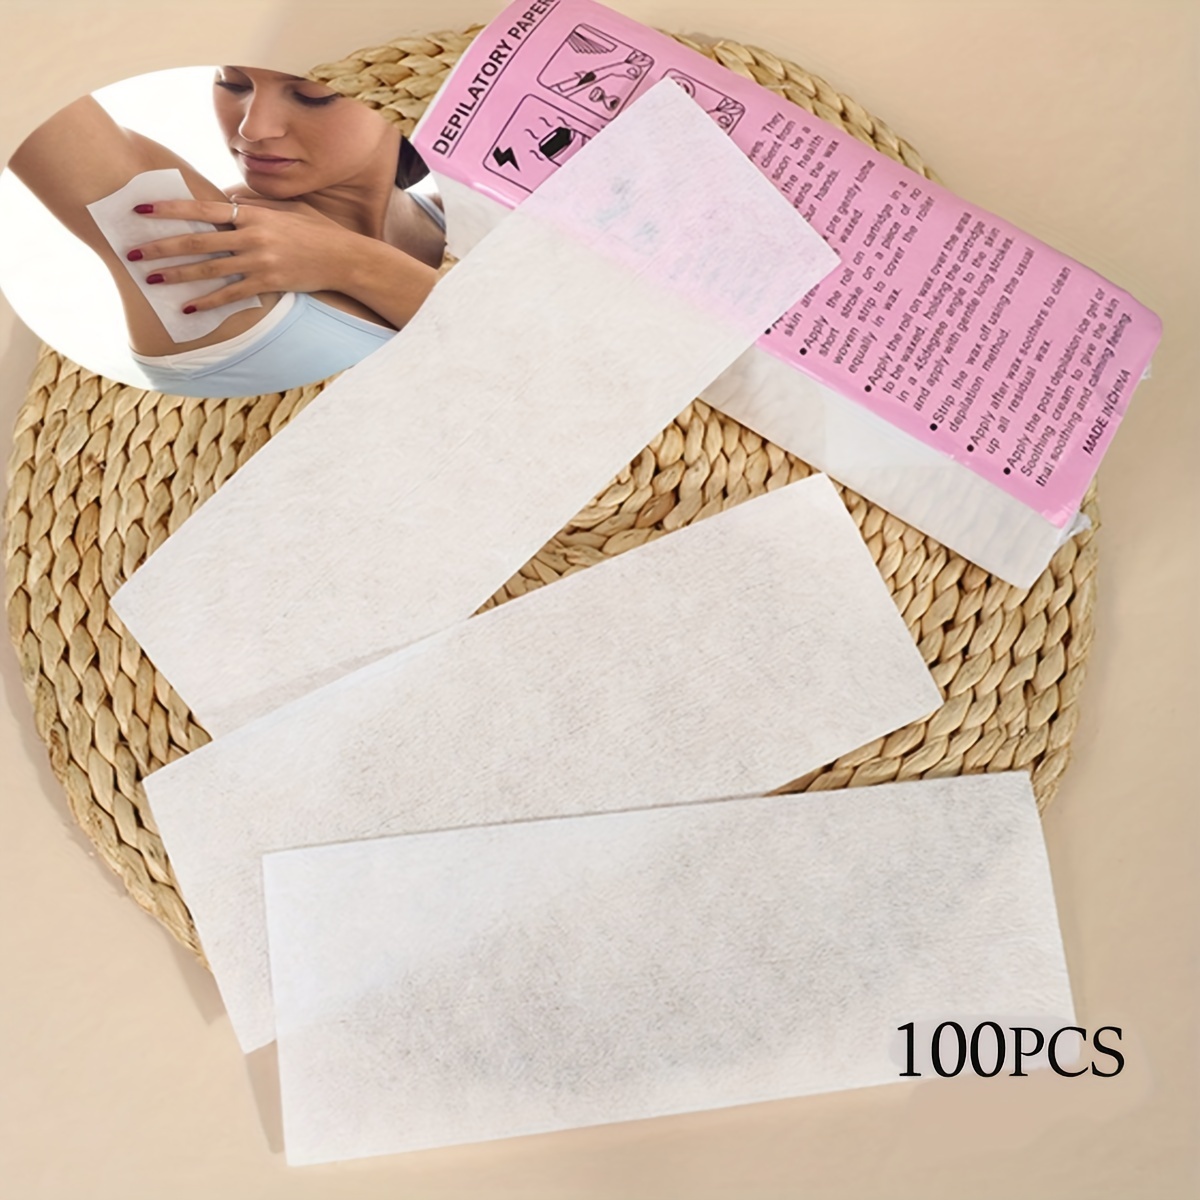 

100pcs/set Disposable Hair Removal Wax Paper Honey Wax Special Paper For Hair Removal